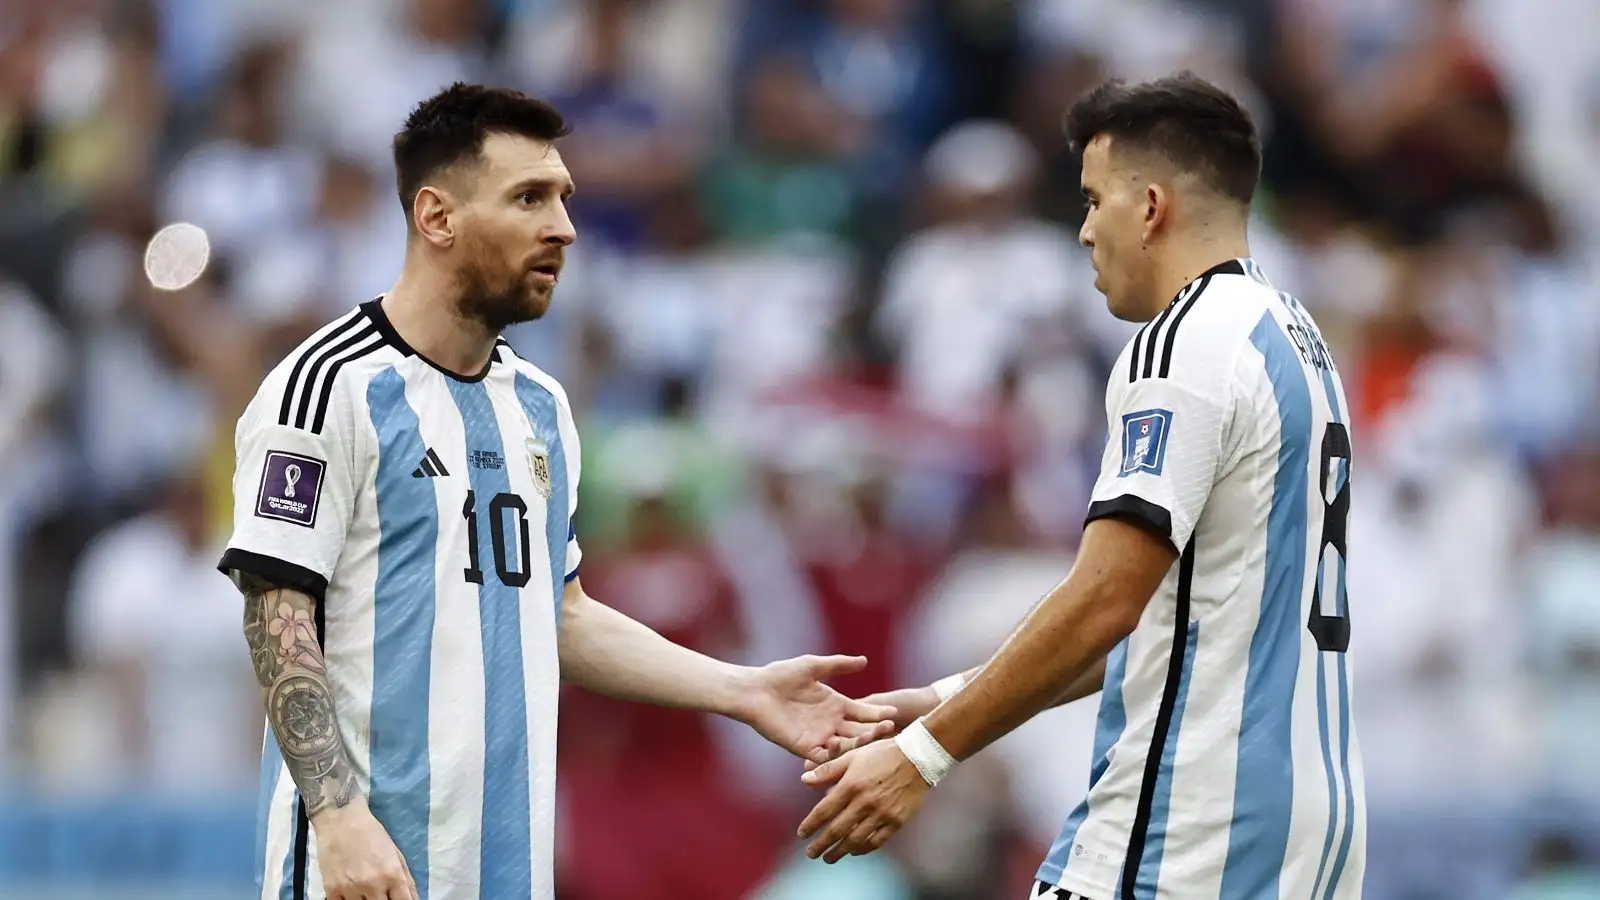 Lionel Messi and Marcos Acuna playing for Argentina during the 2022 World Cup